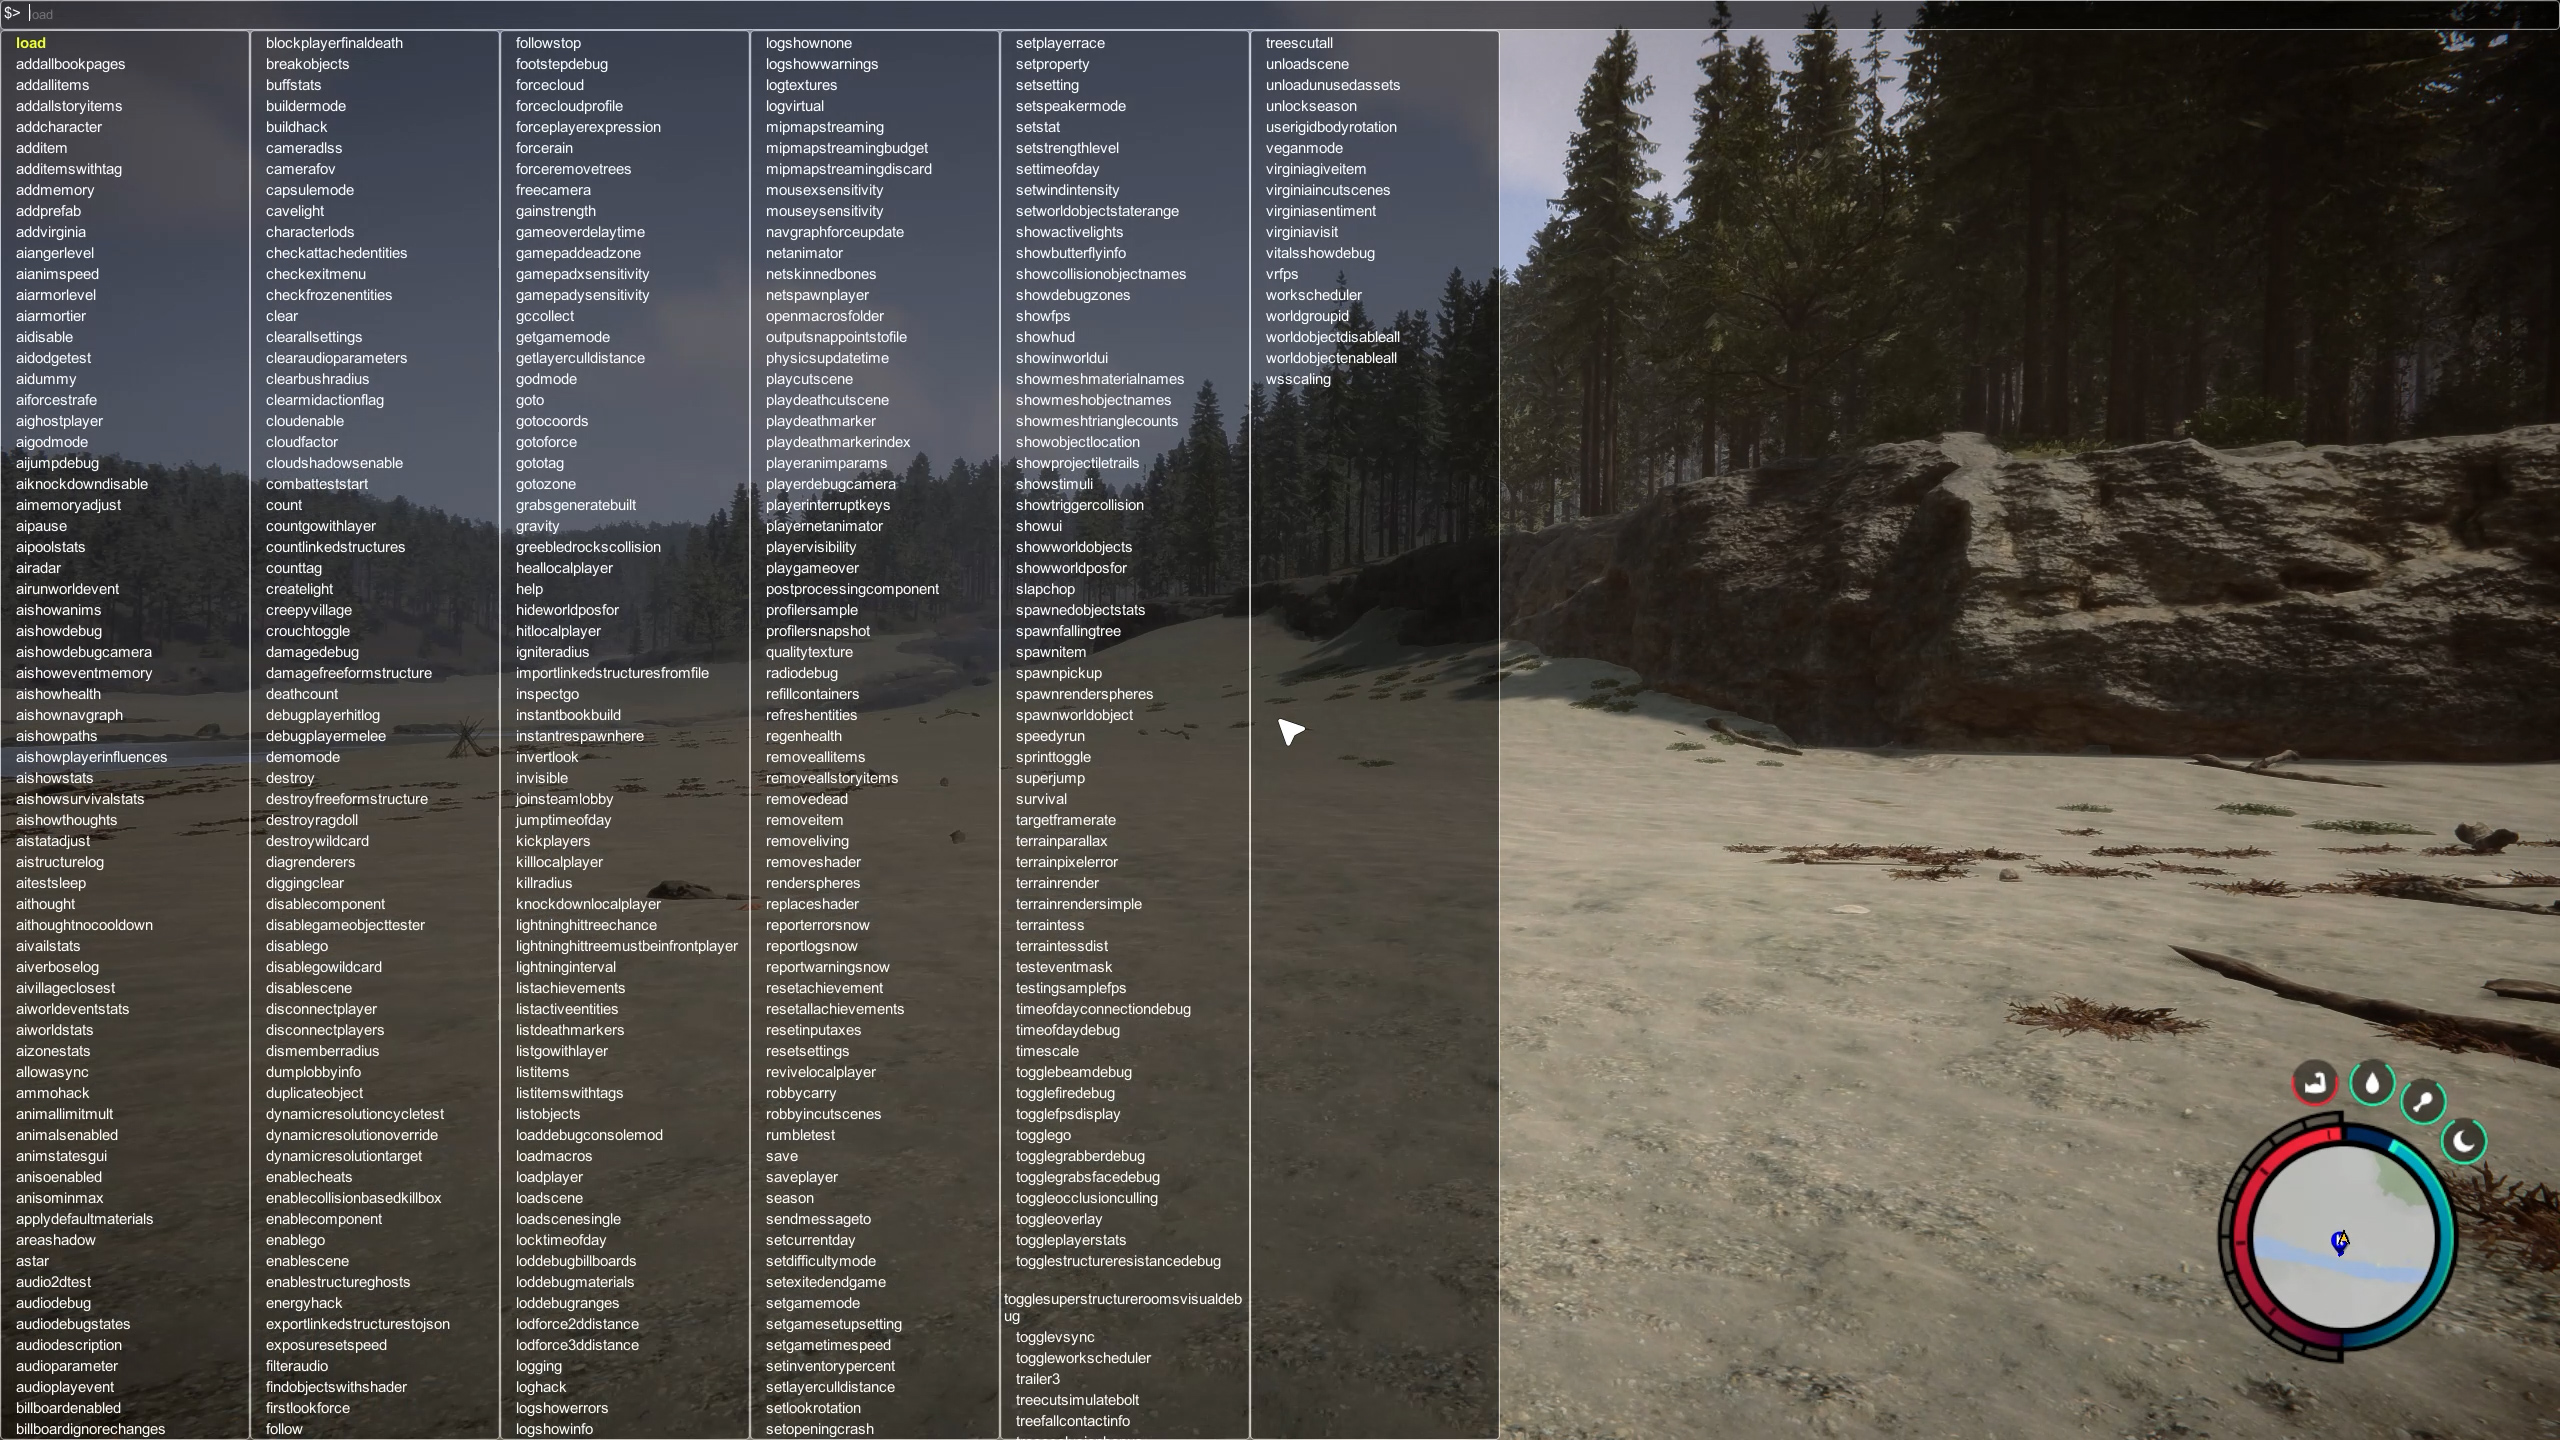 Sons of the Forest debug commands: How to use cheats